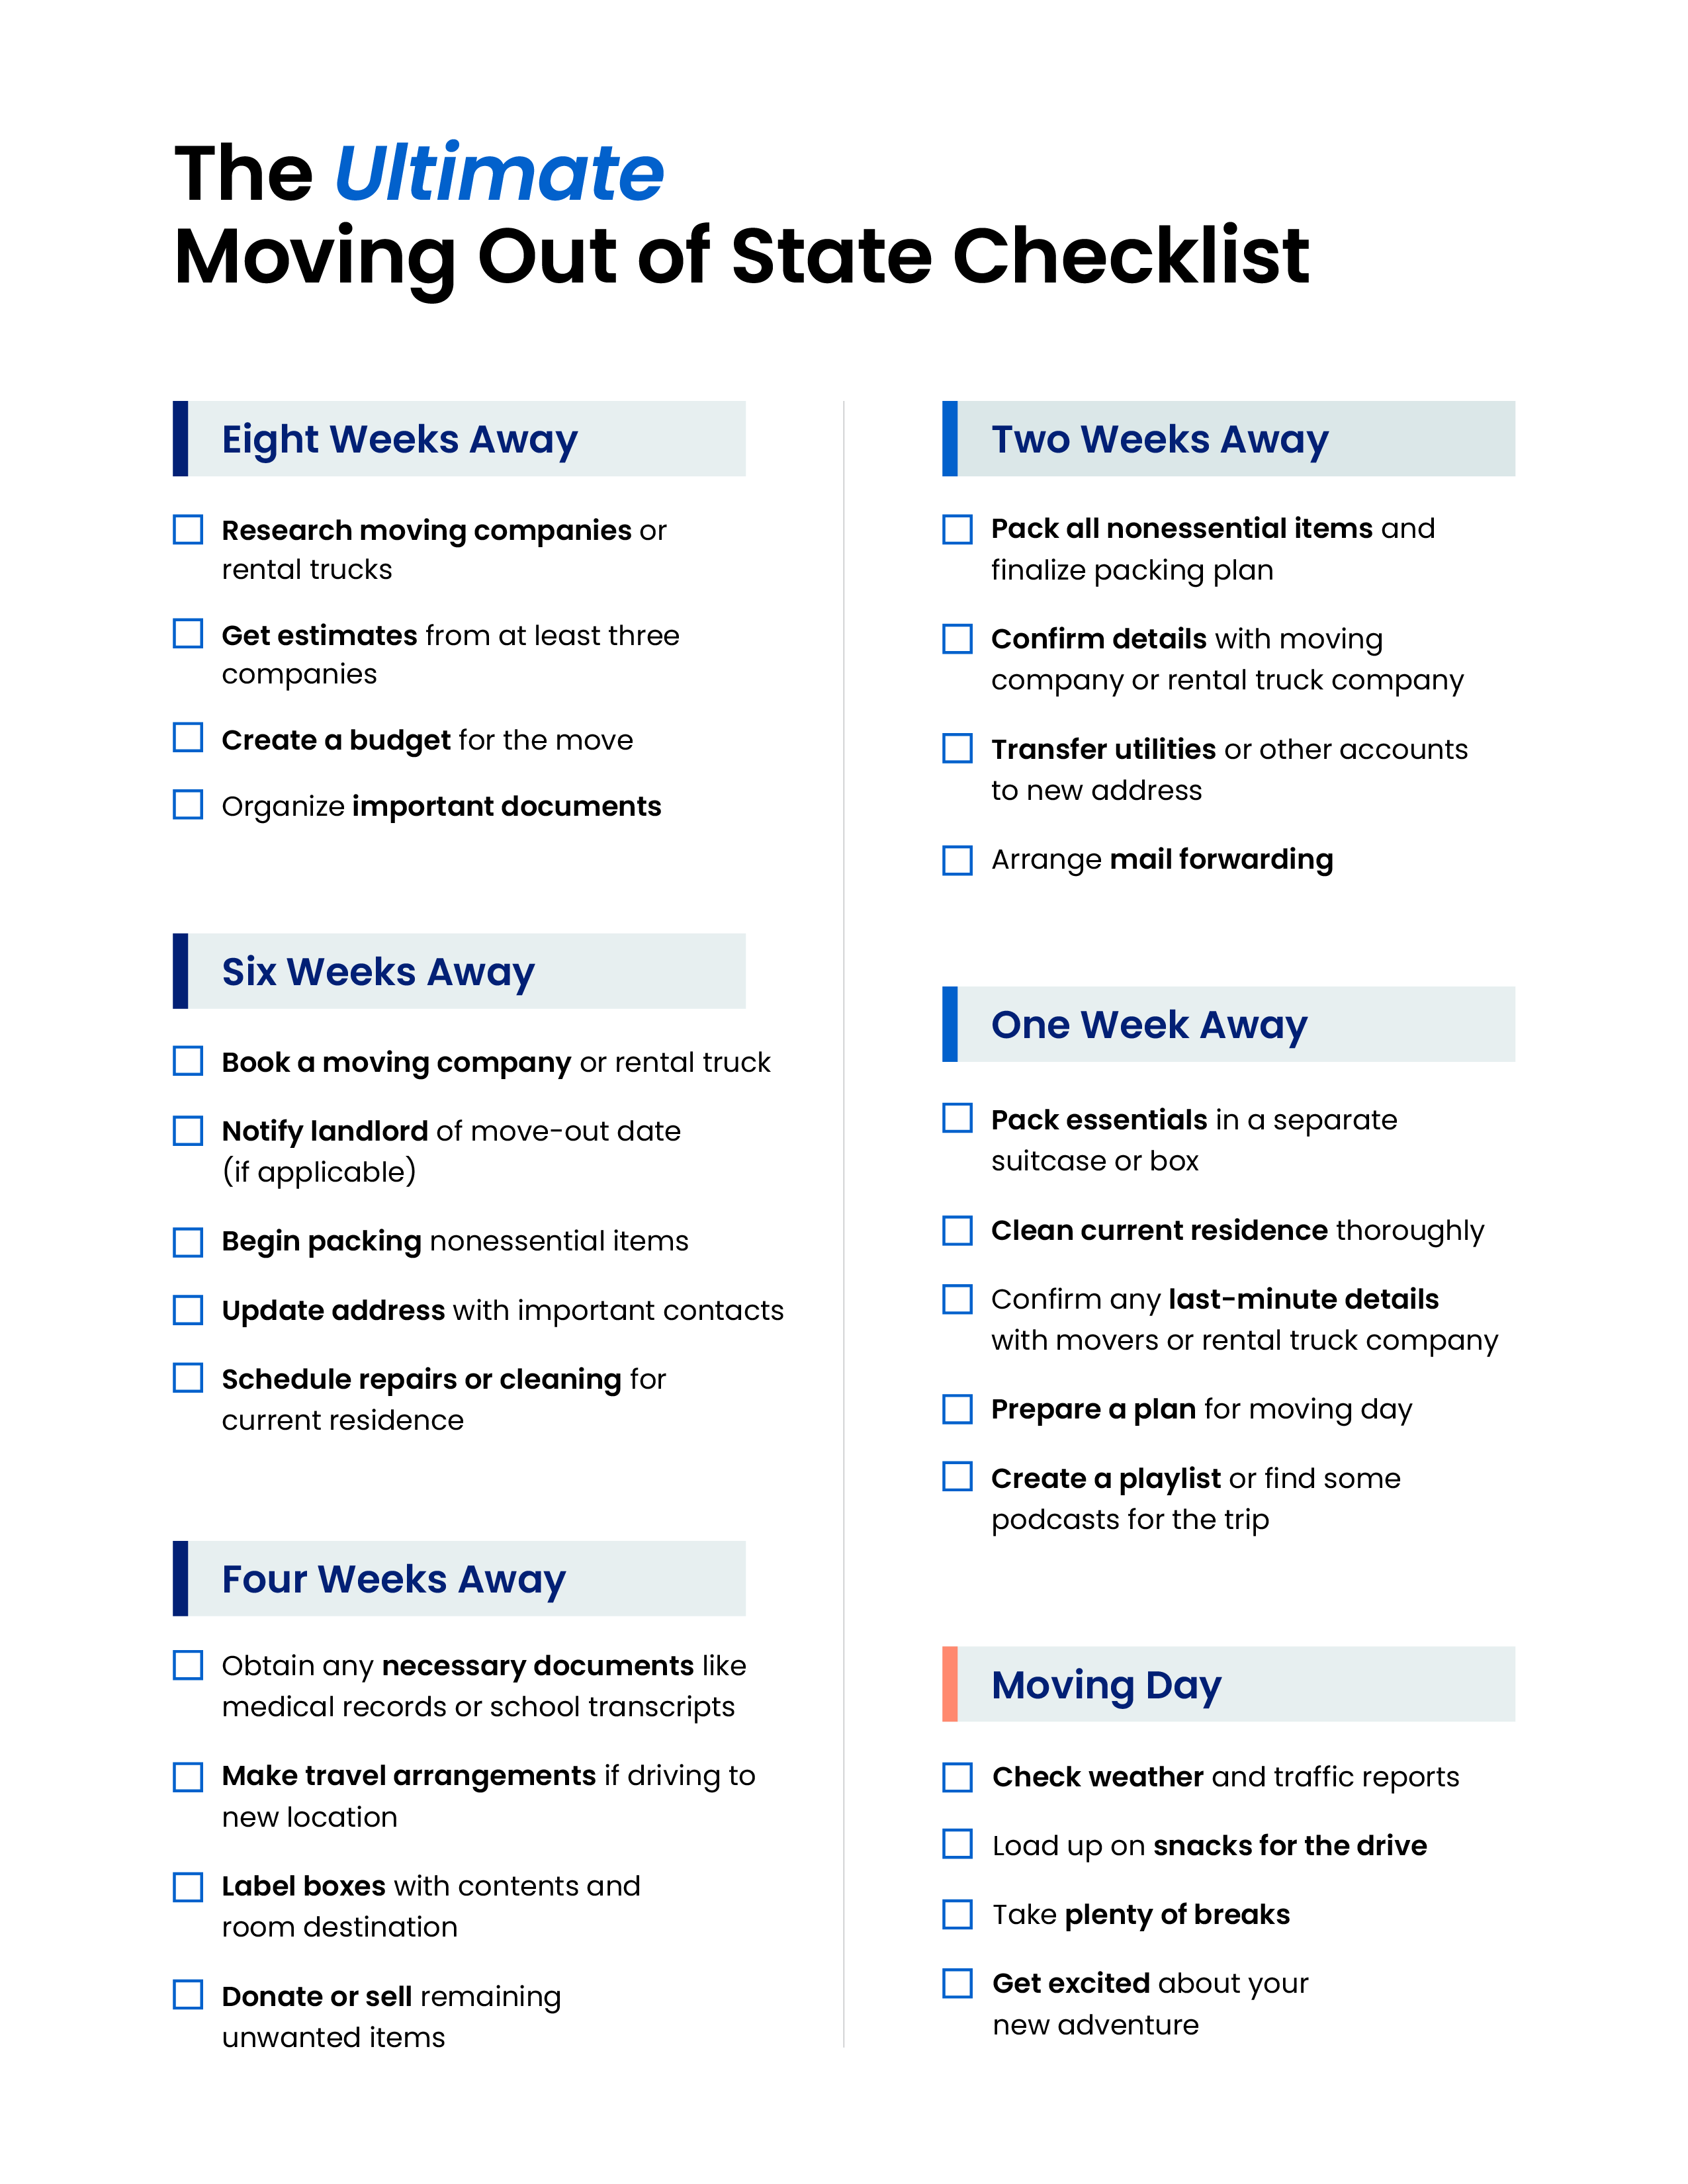 12-top-tips-for-moving-out-of-state-timeline-and-checklist